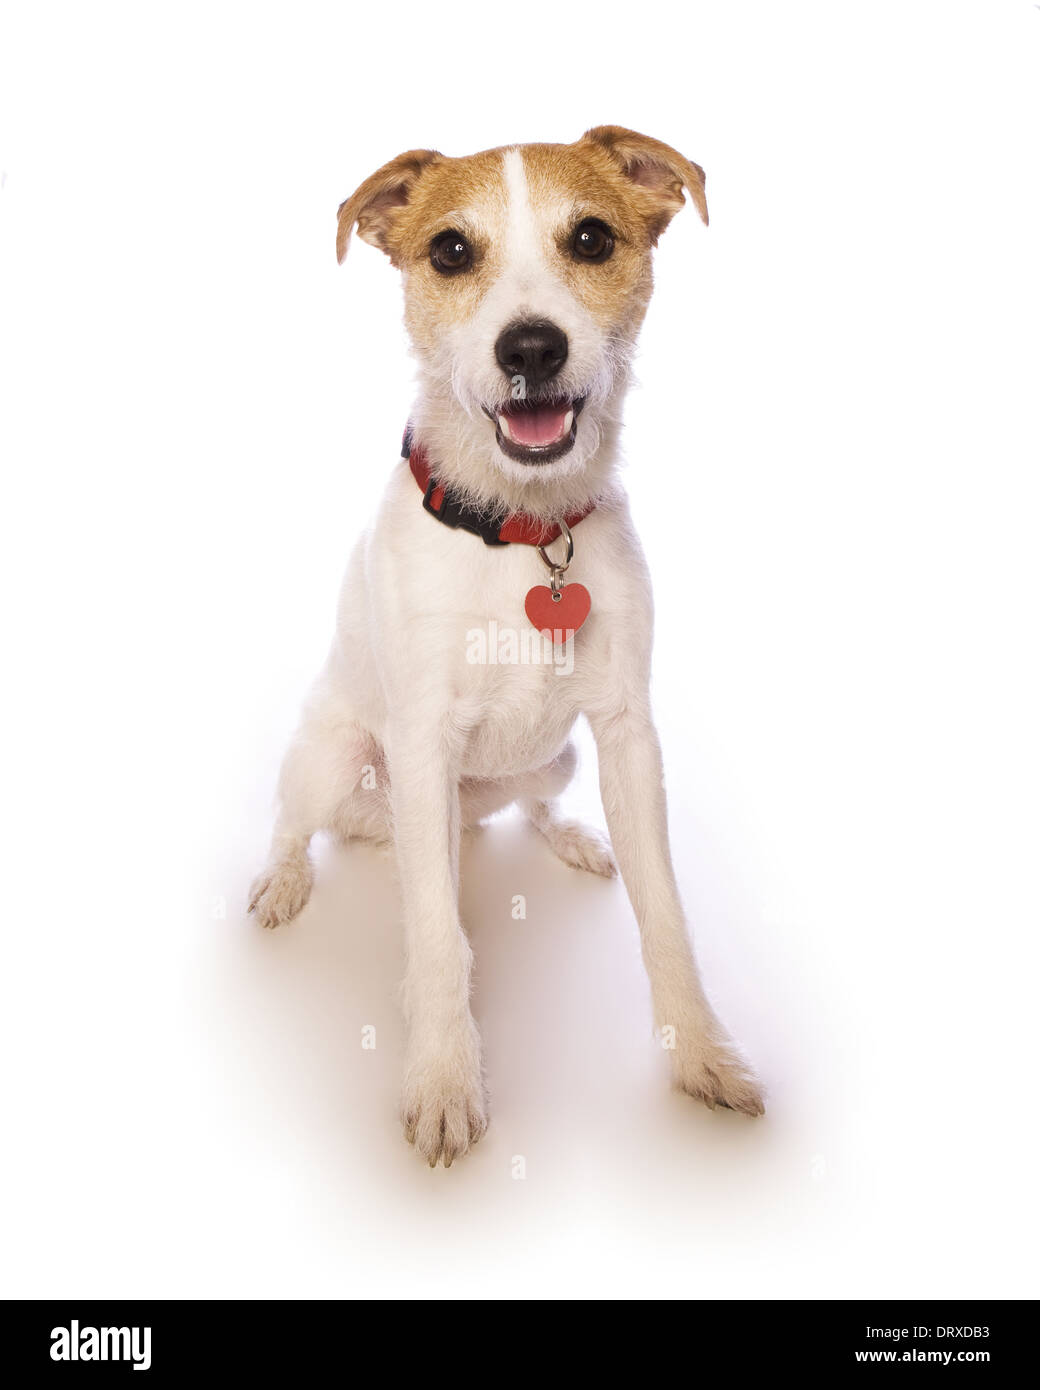 jack russell dog sitting wearing heart tag on collar isolated on white Stock Photo